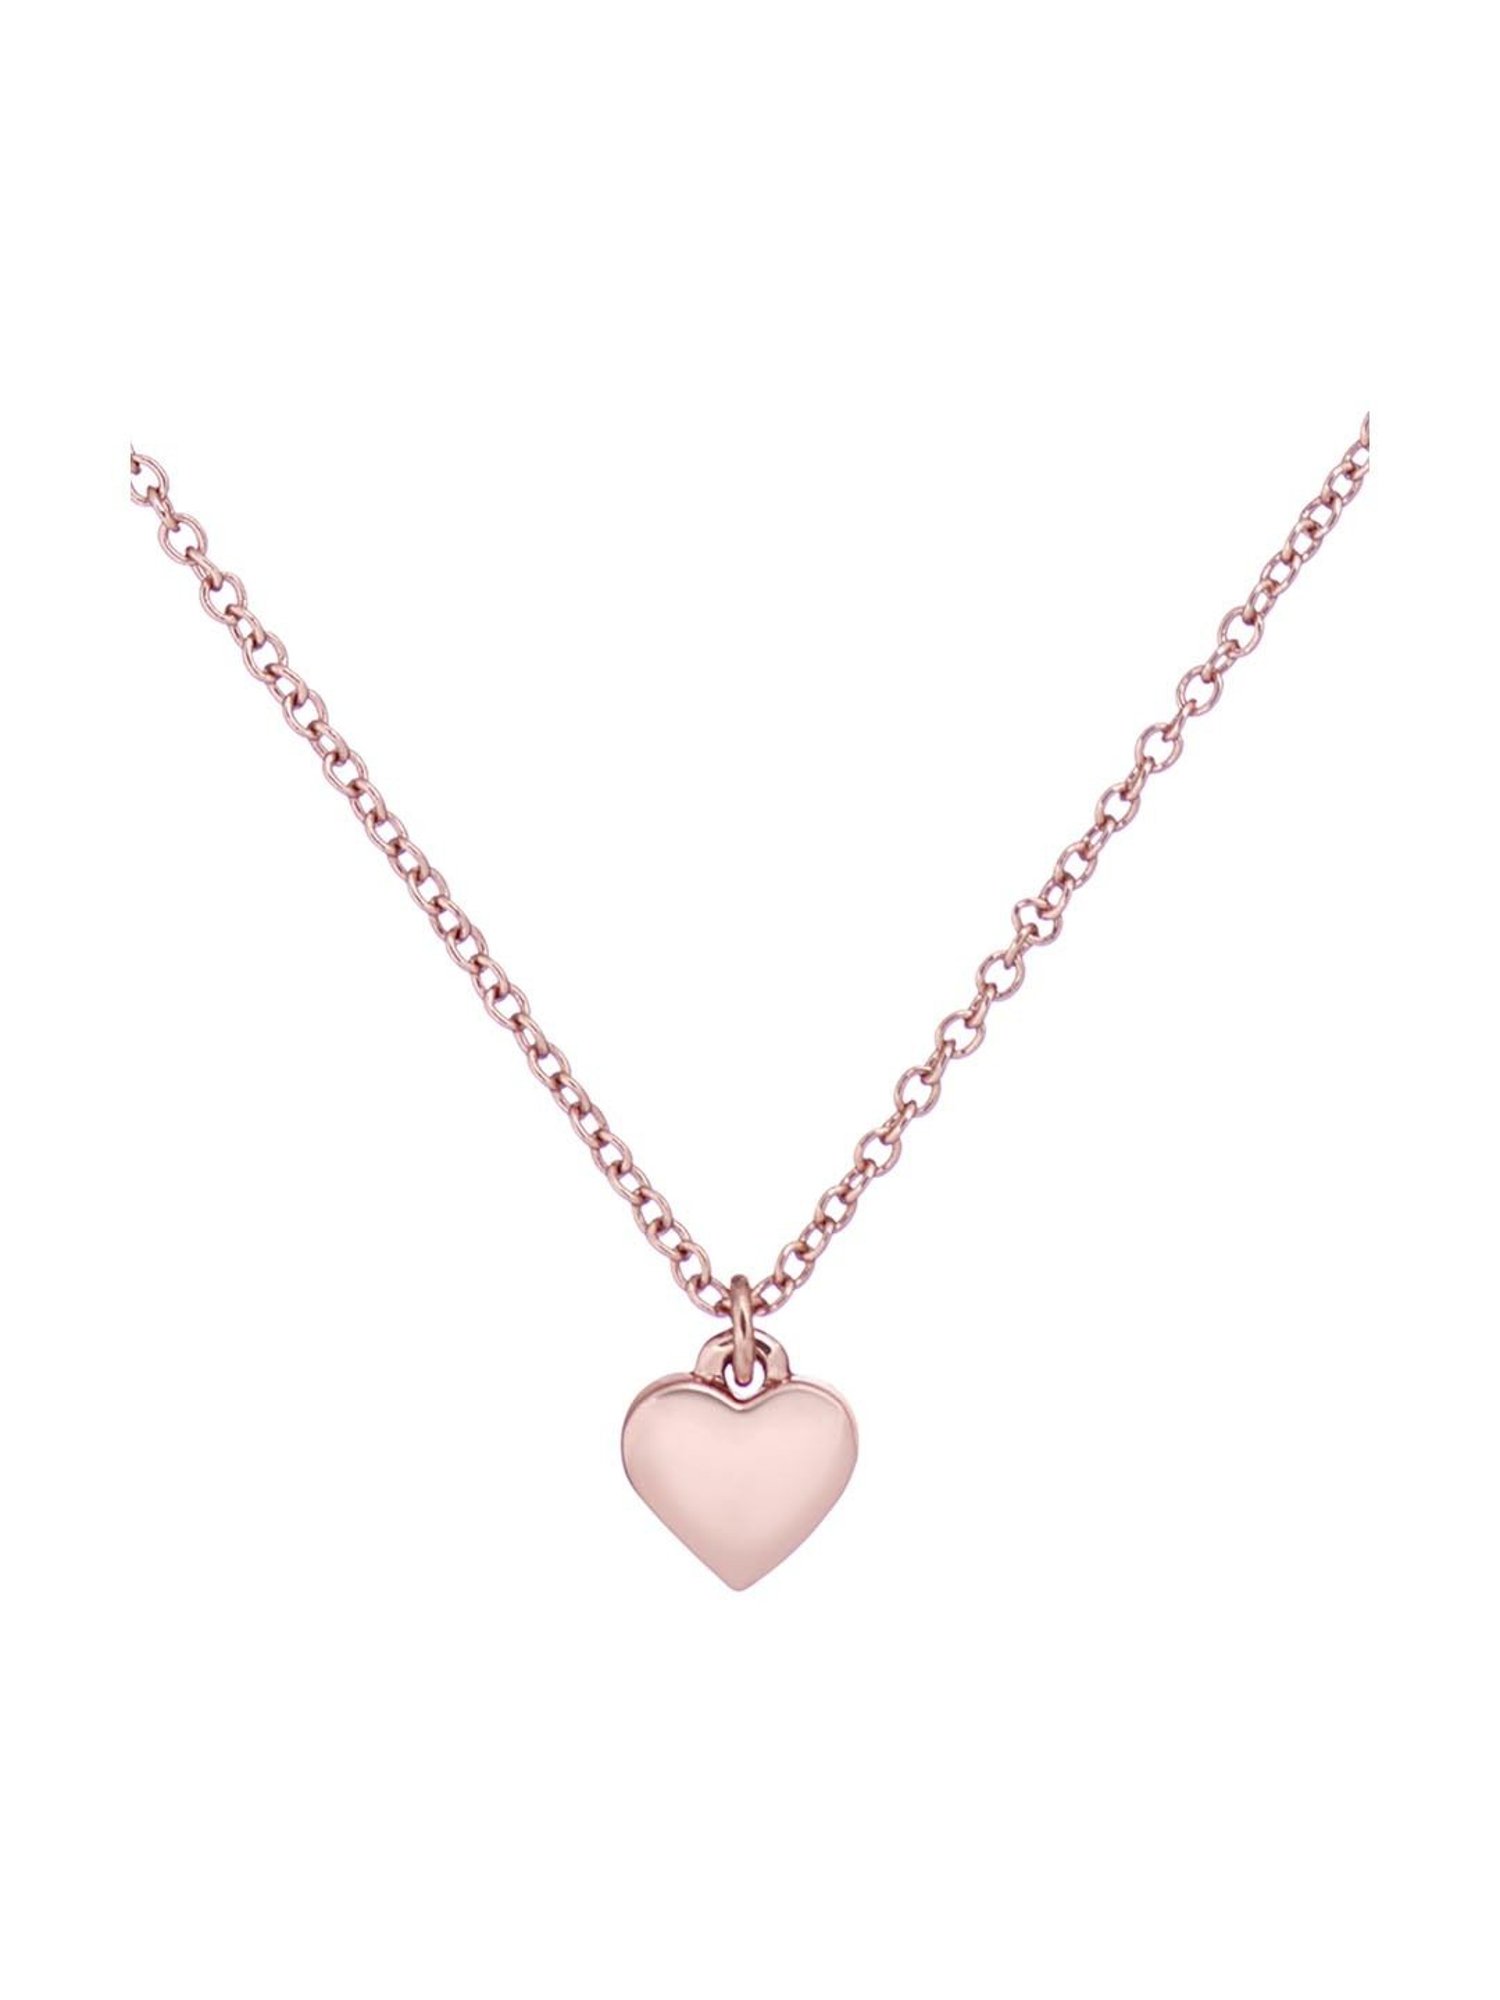 Buy Ted Baker Tiny Heart Pendant Necklace at Amazon.in